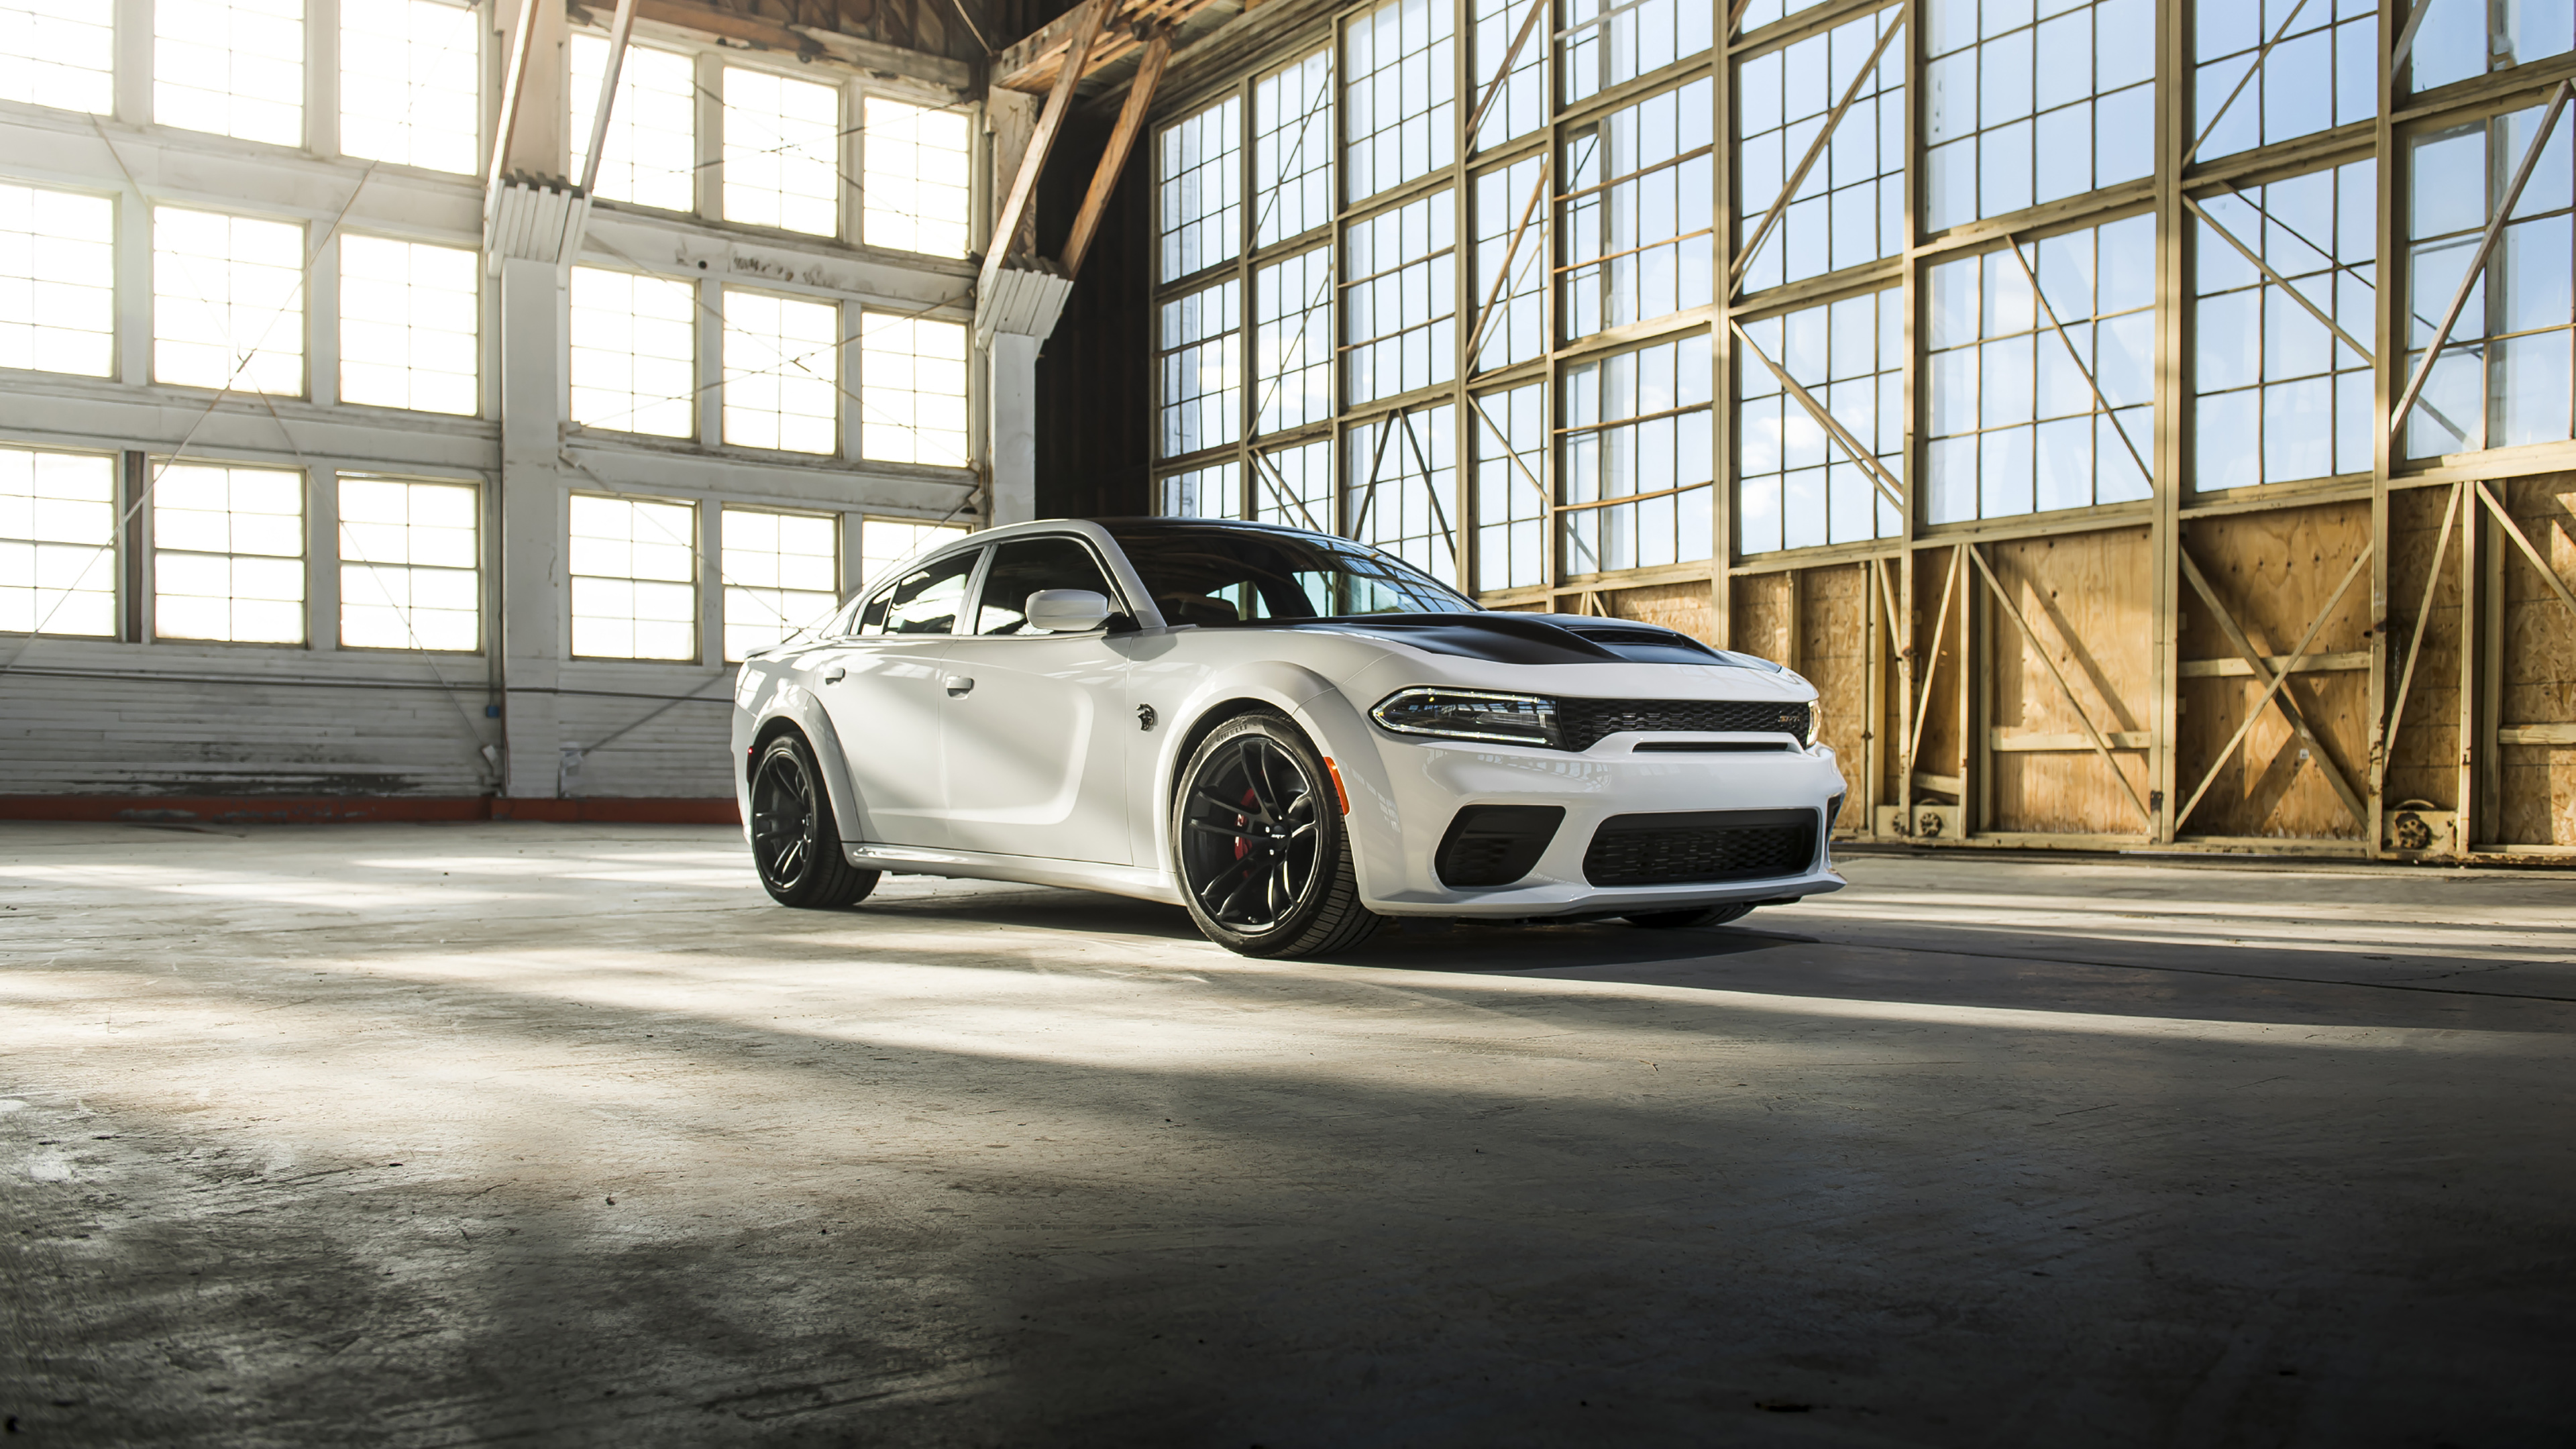 2021 Dodge Charger SRT Hellcat Redeye Widebody  Wallpapers and HD Images   Car Pixel